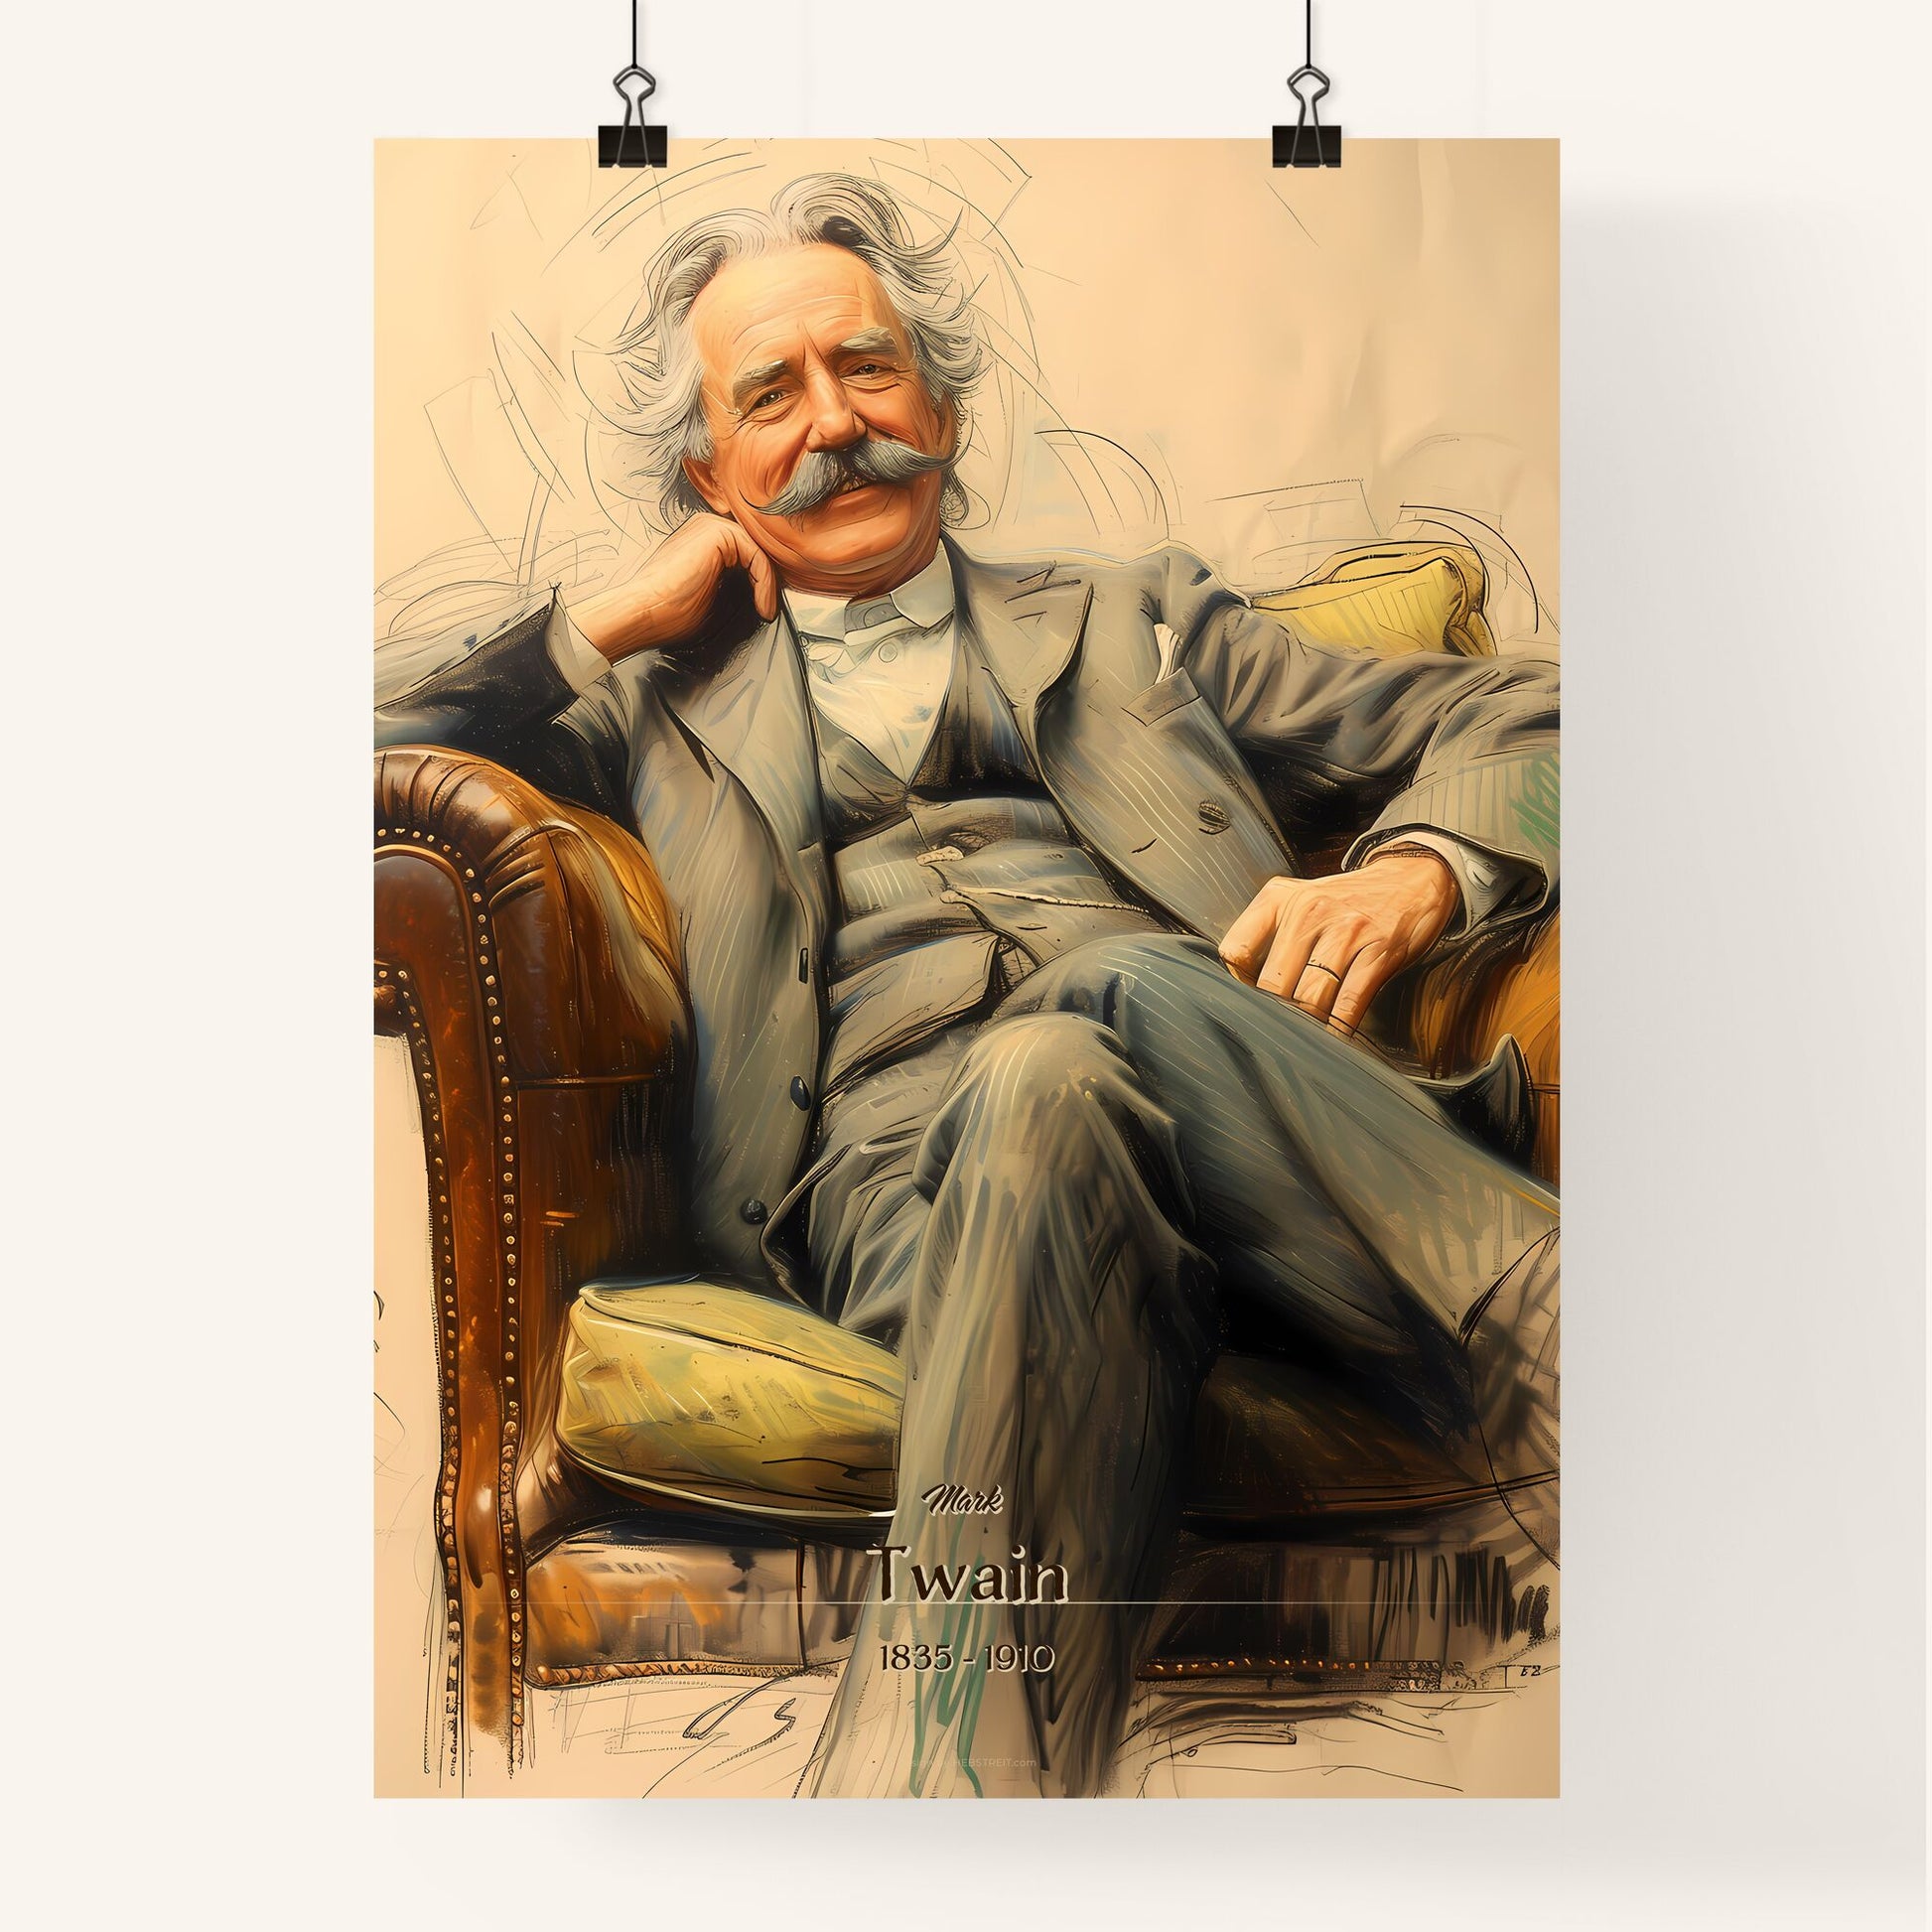 Mark, Twain, 1835 - 1910, A Poster of a man sitting in a chair Default Title